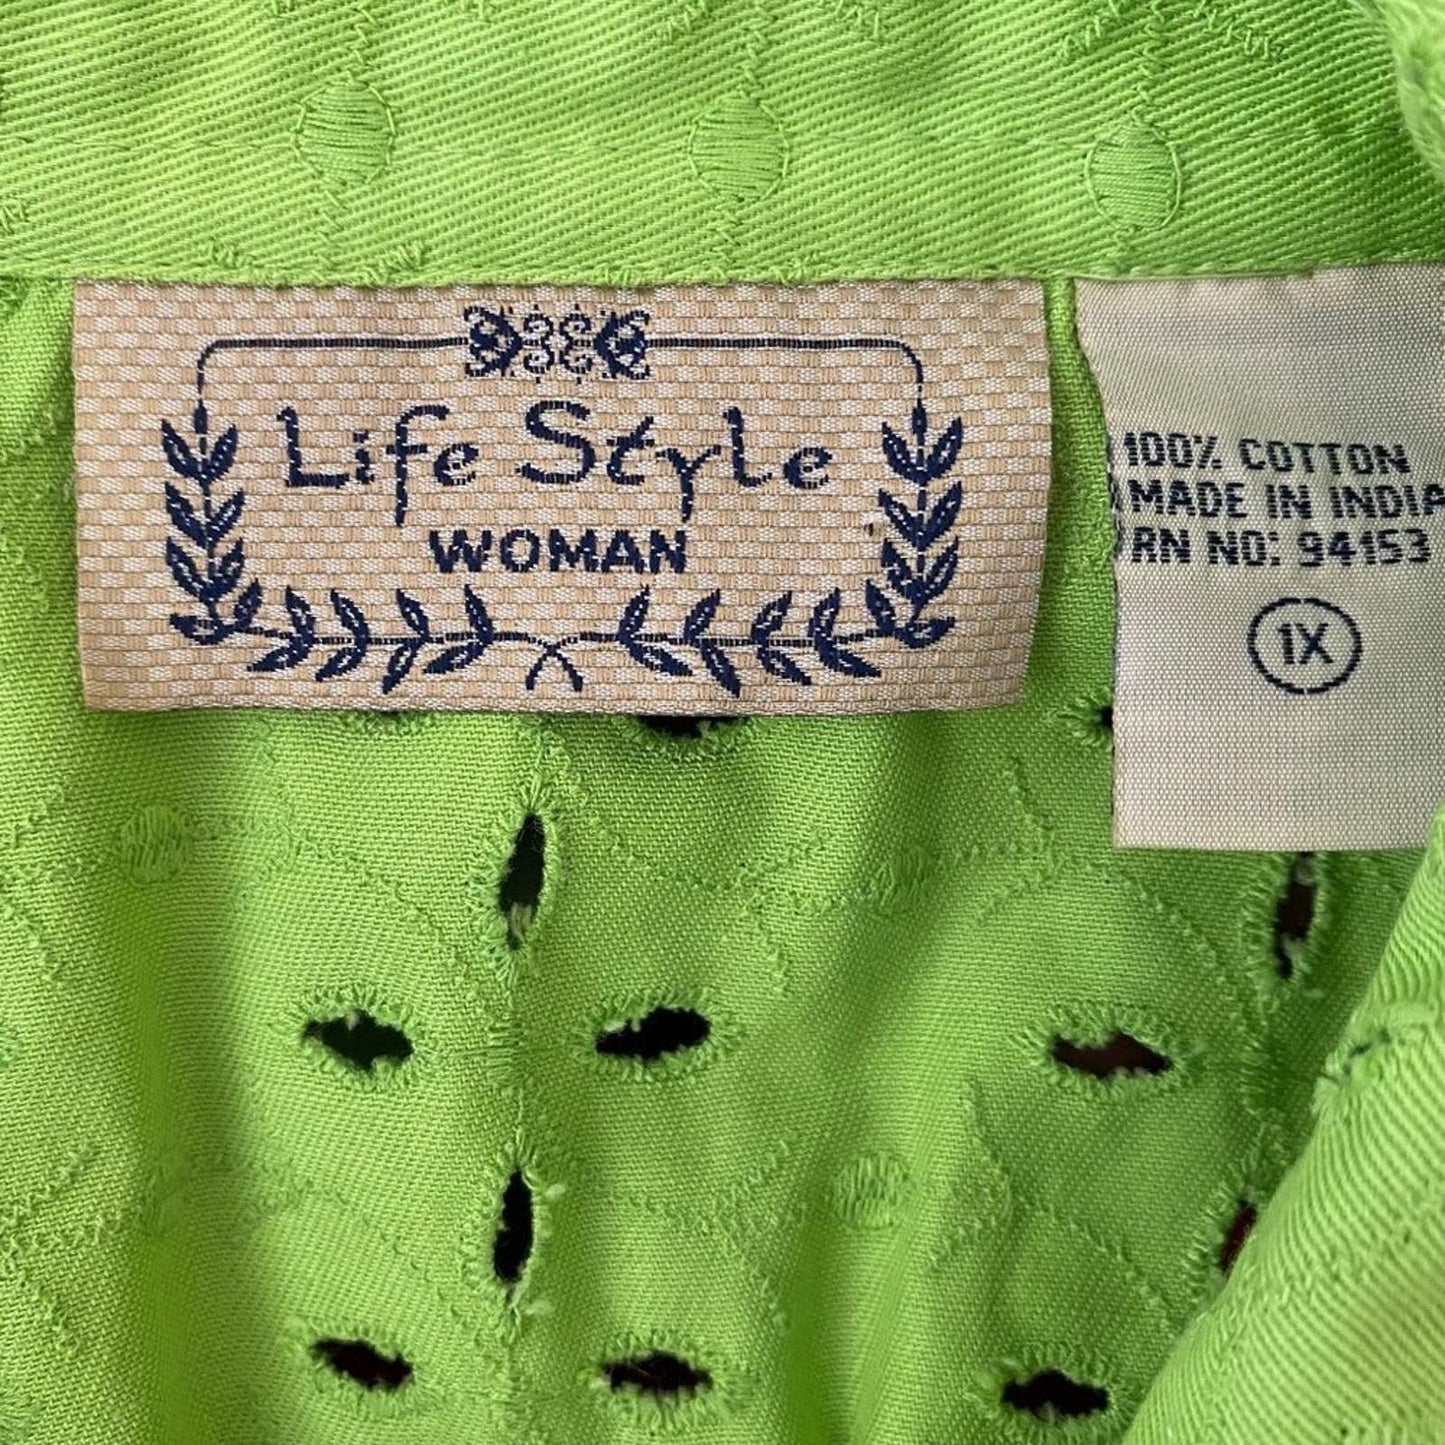 Life Style Woman sz  1X collared 100% cotton button bright neon blouse